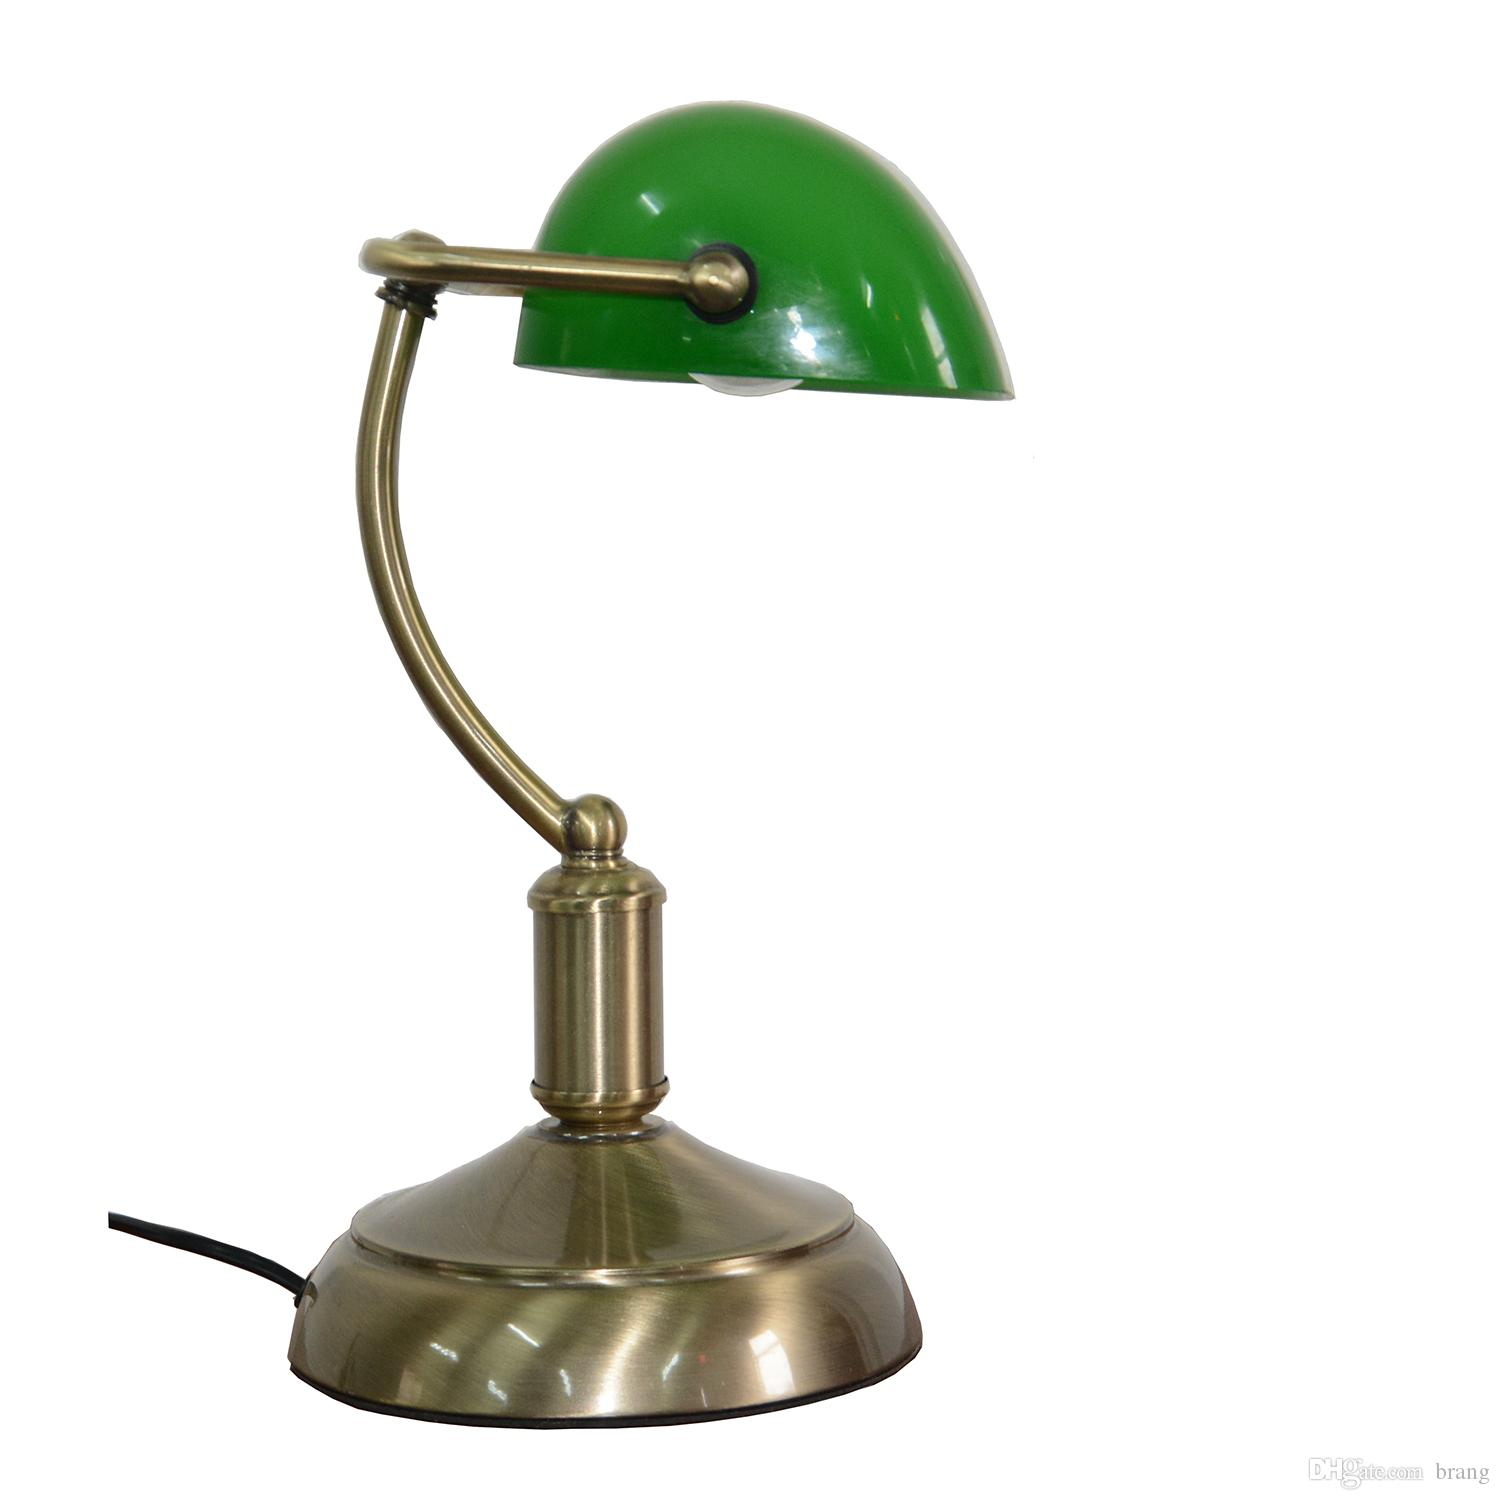 2019 Green Glass Traditional Banker Lamp Desk Lamp Light Fixture Antique Brass Finish Metal Lamp Base Home Accents From Brang 2011 Dhgate throughout dimensions 1500 X 1500